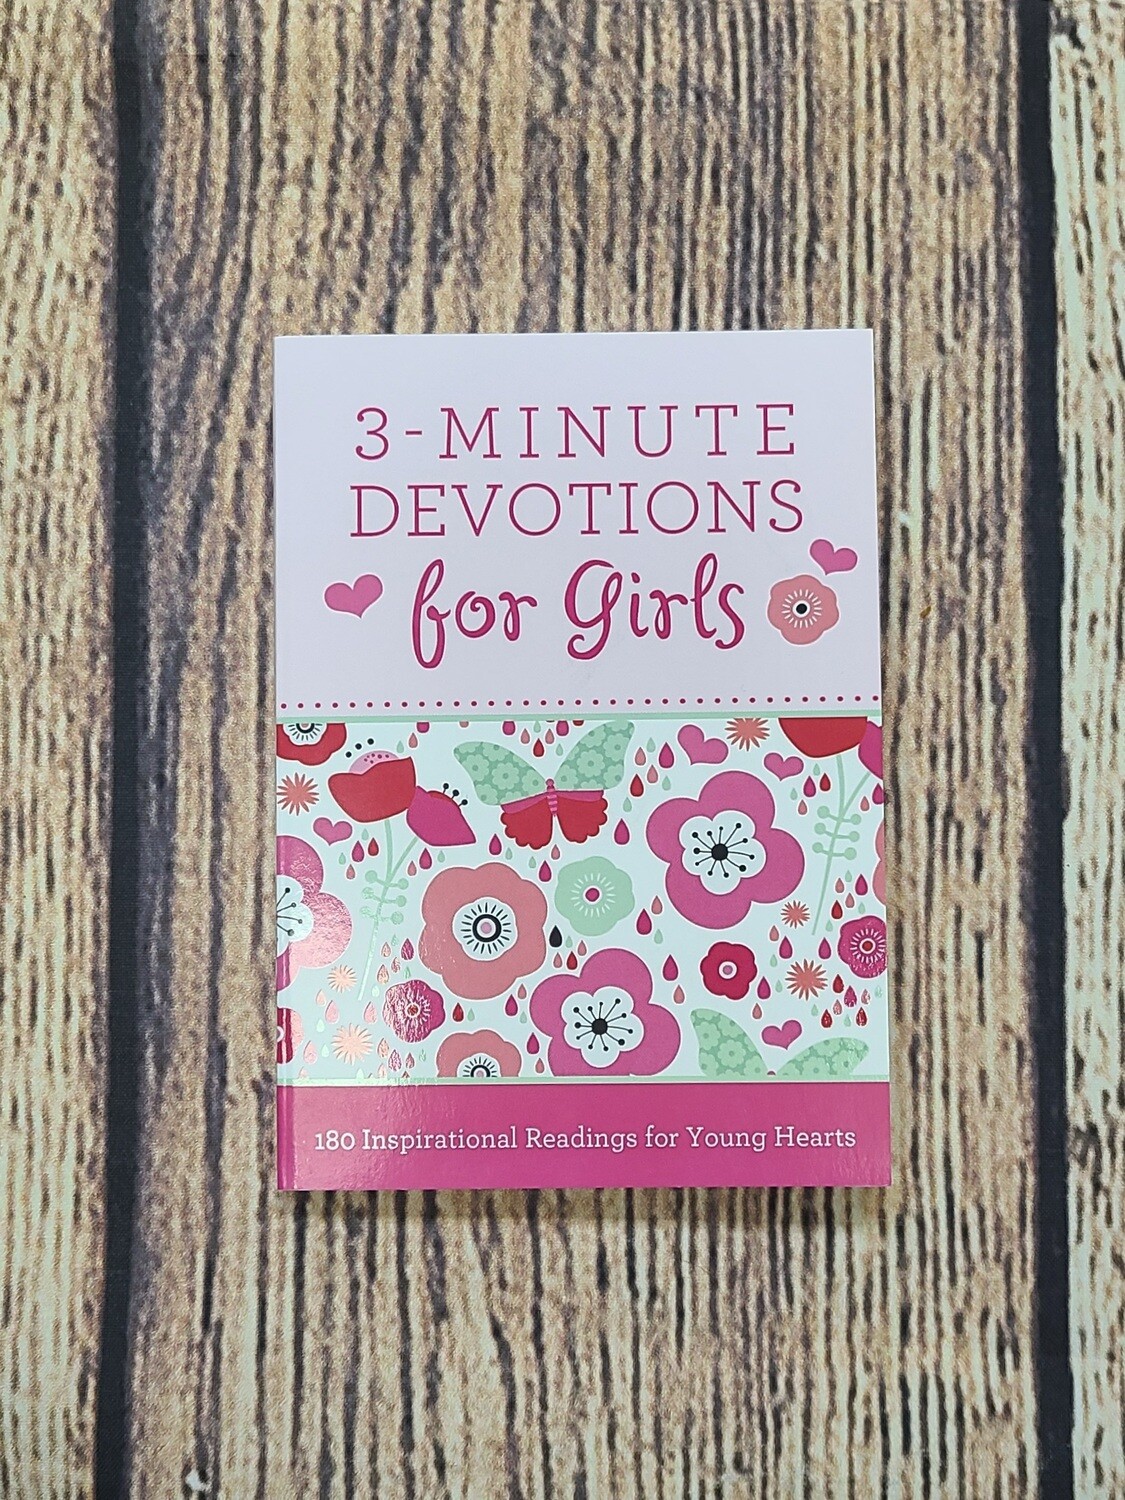 3-Minute Devotions for Girls by Janice Hanna Thompson